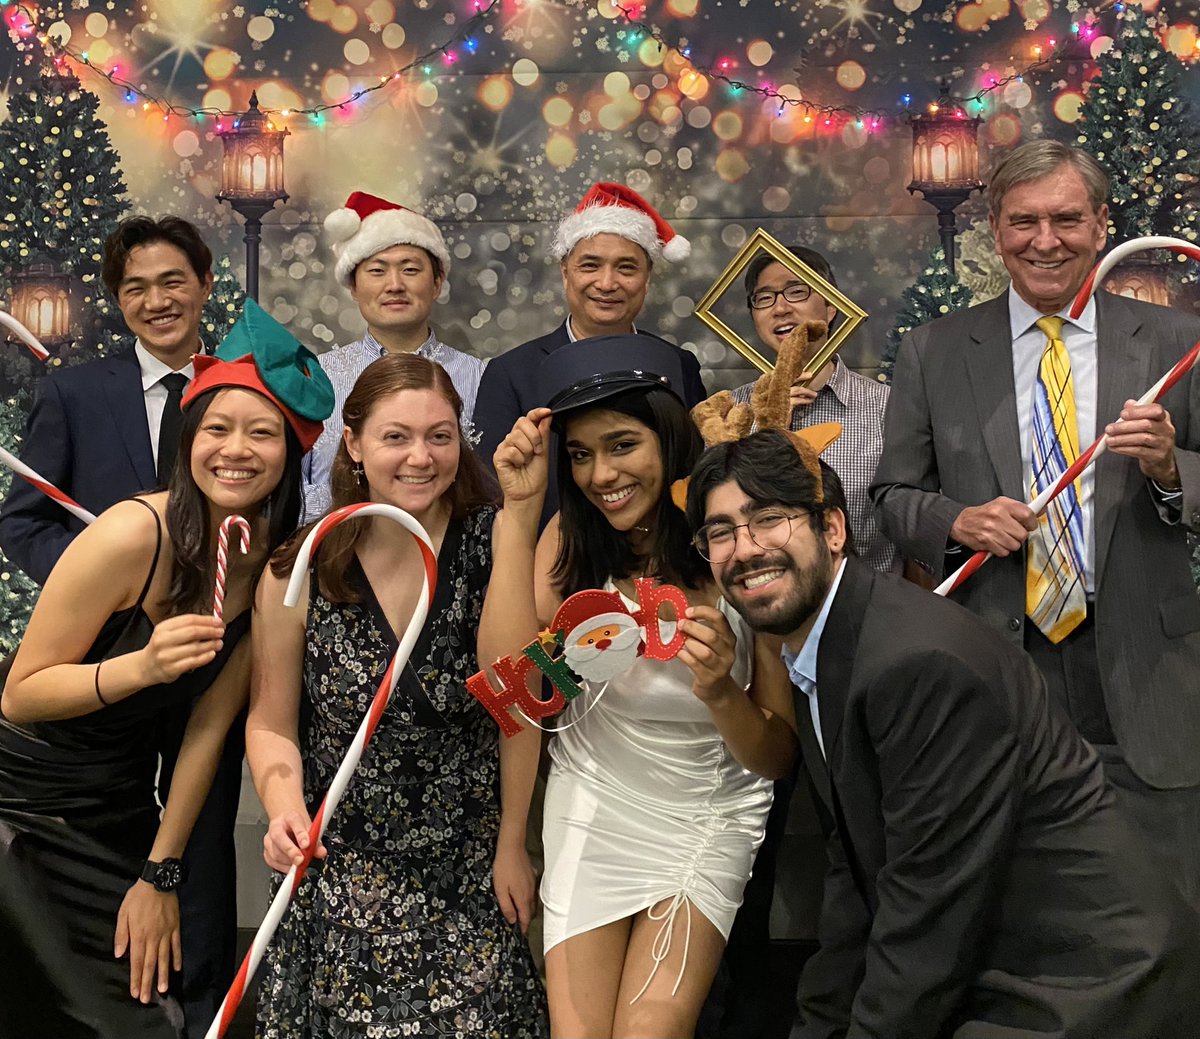 Having fun at UCLA BMES chapter holiday party! @JunChenLab @BioEngUCLA